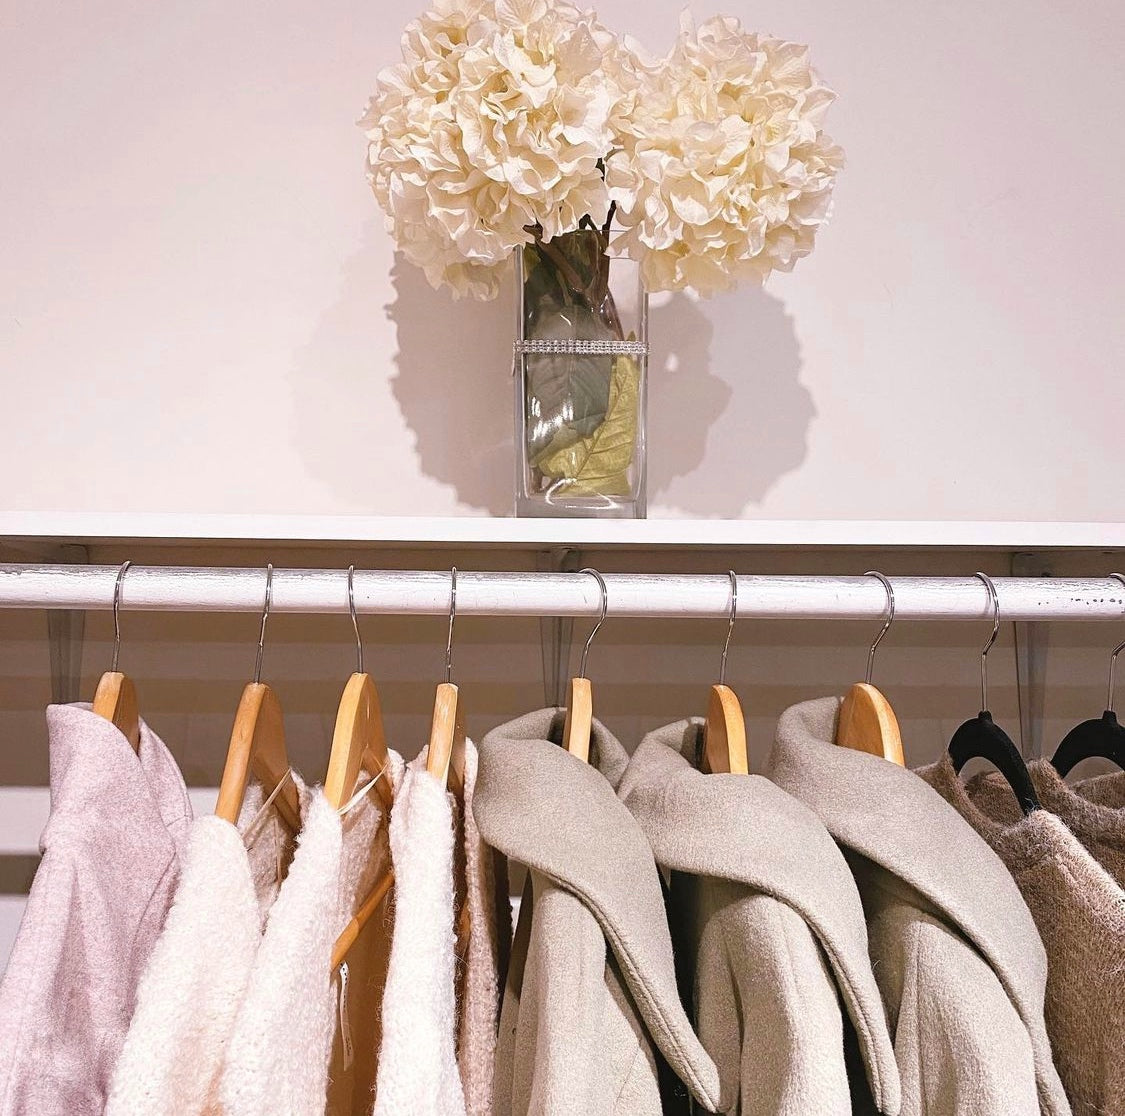 Spring Clean Your Closet in 1 Easy Step!